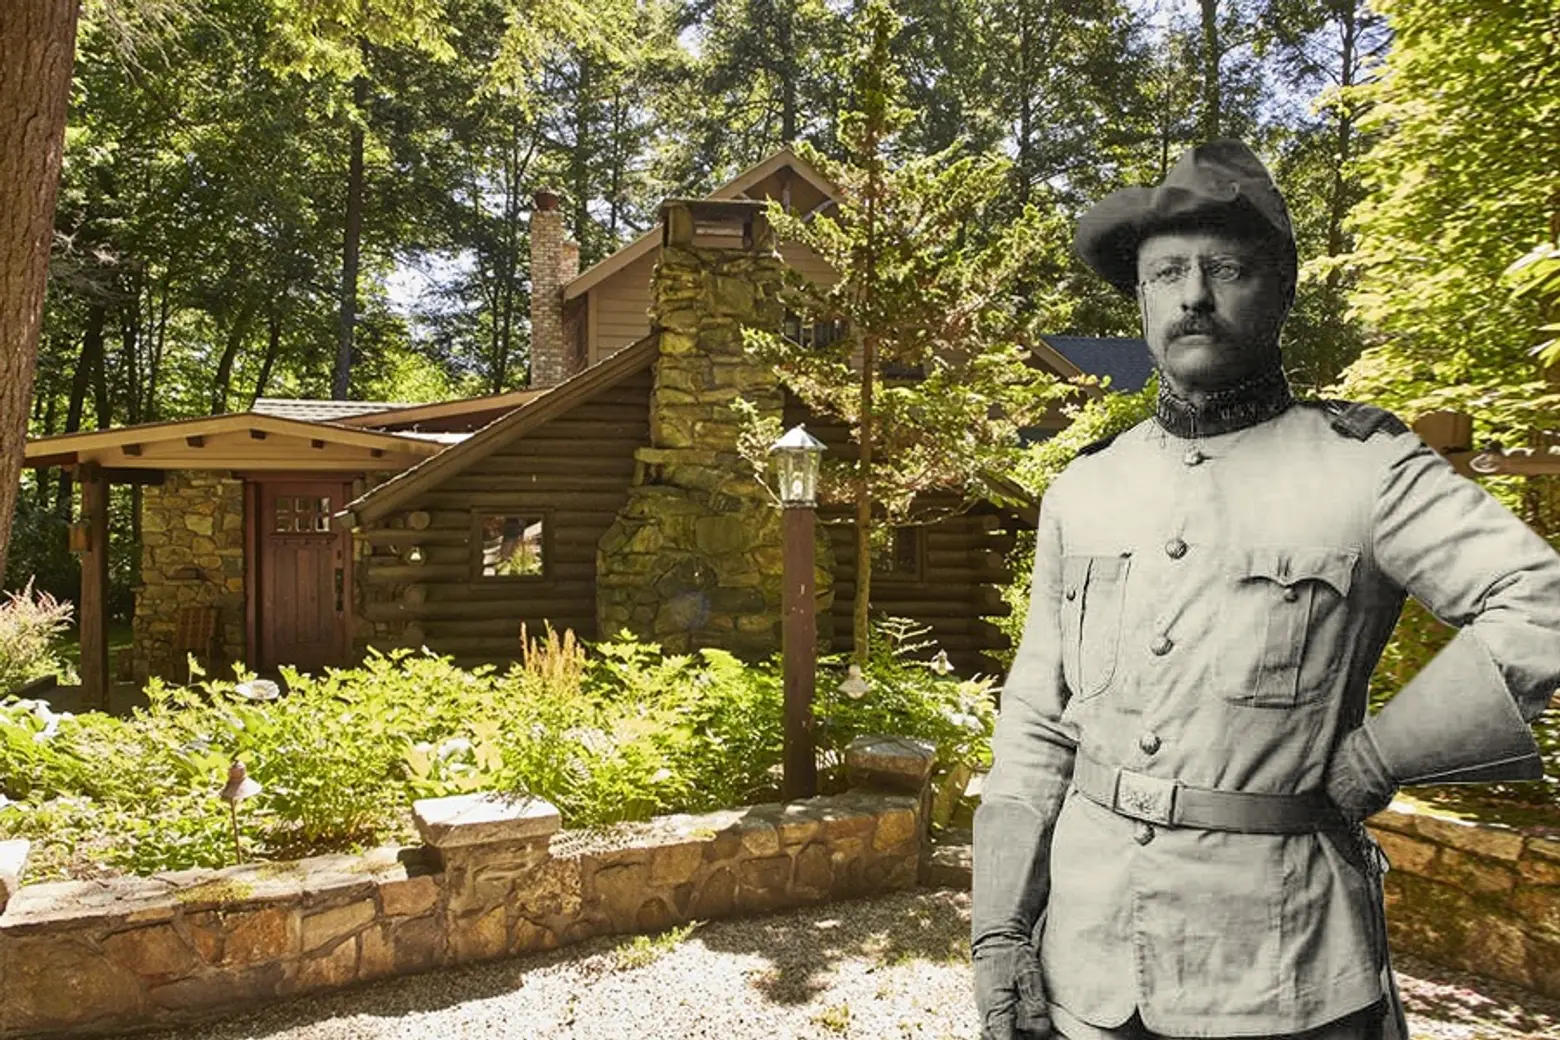 Live like Theodore Roosevelt in an updated log cabin upstate for $1.15M